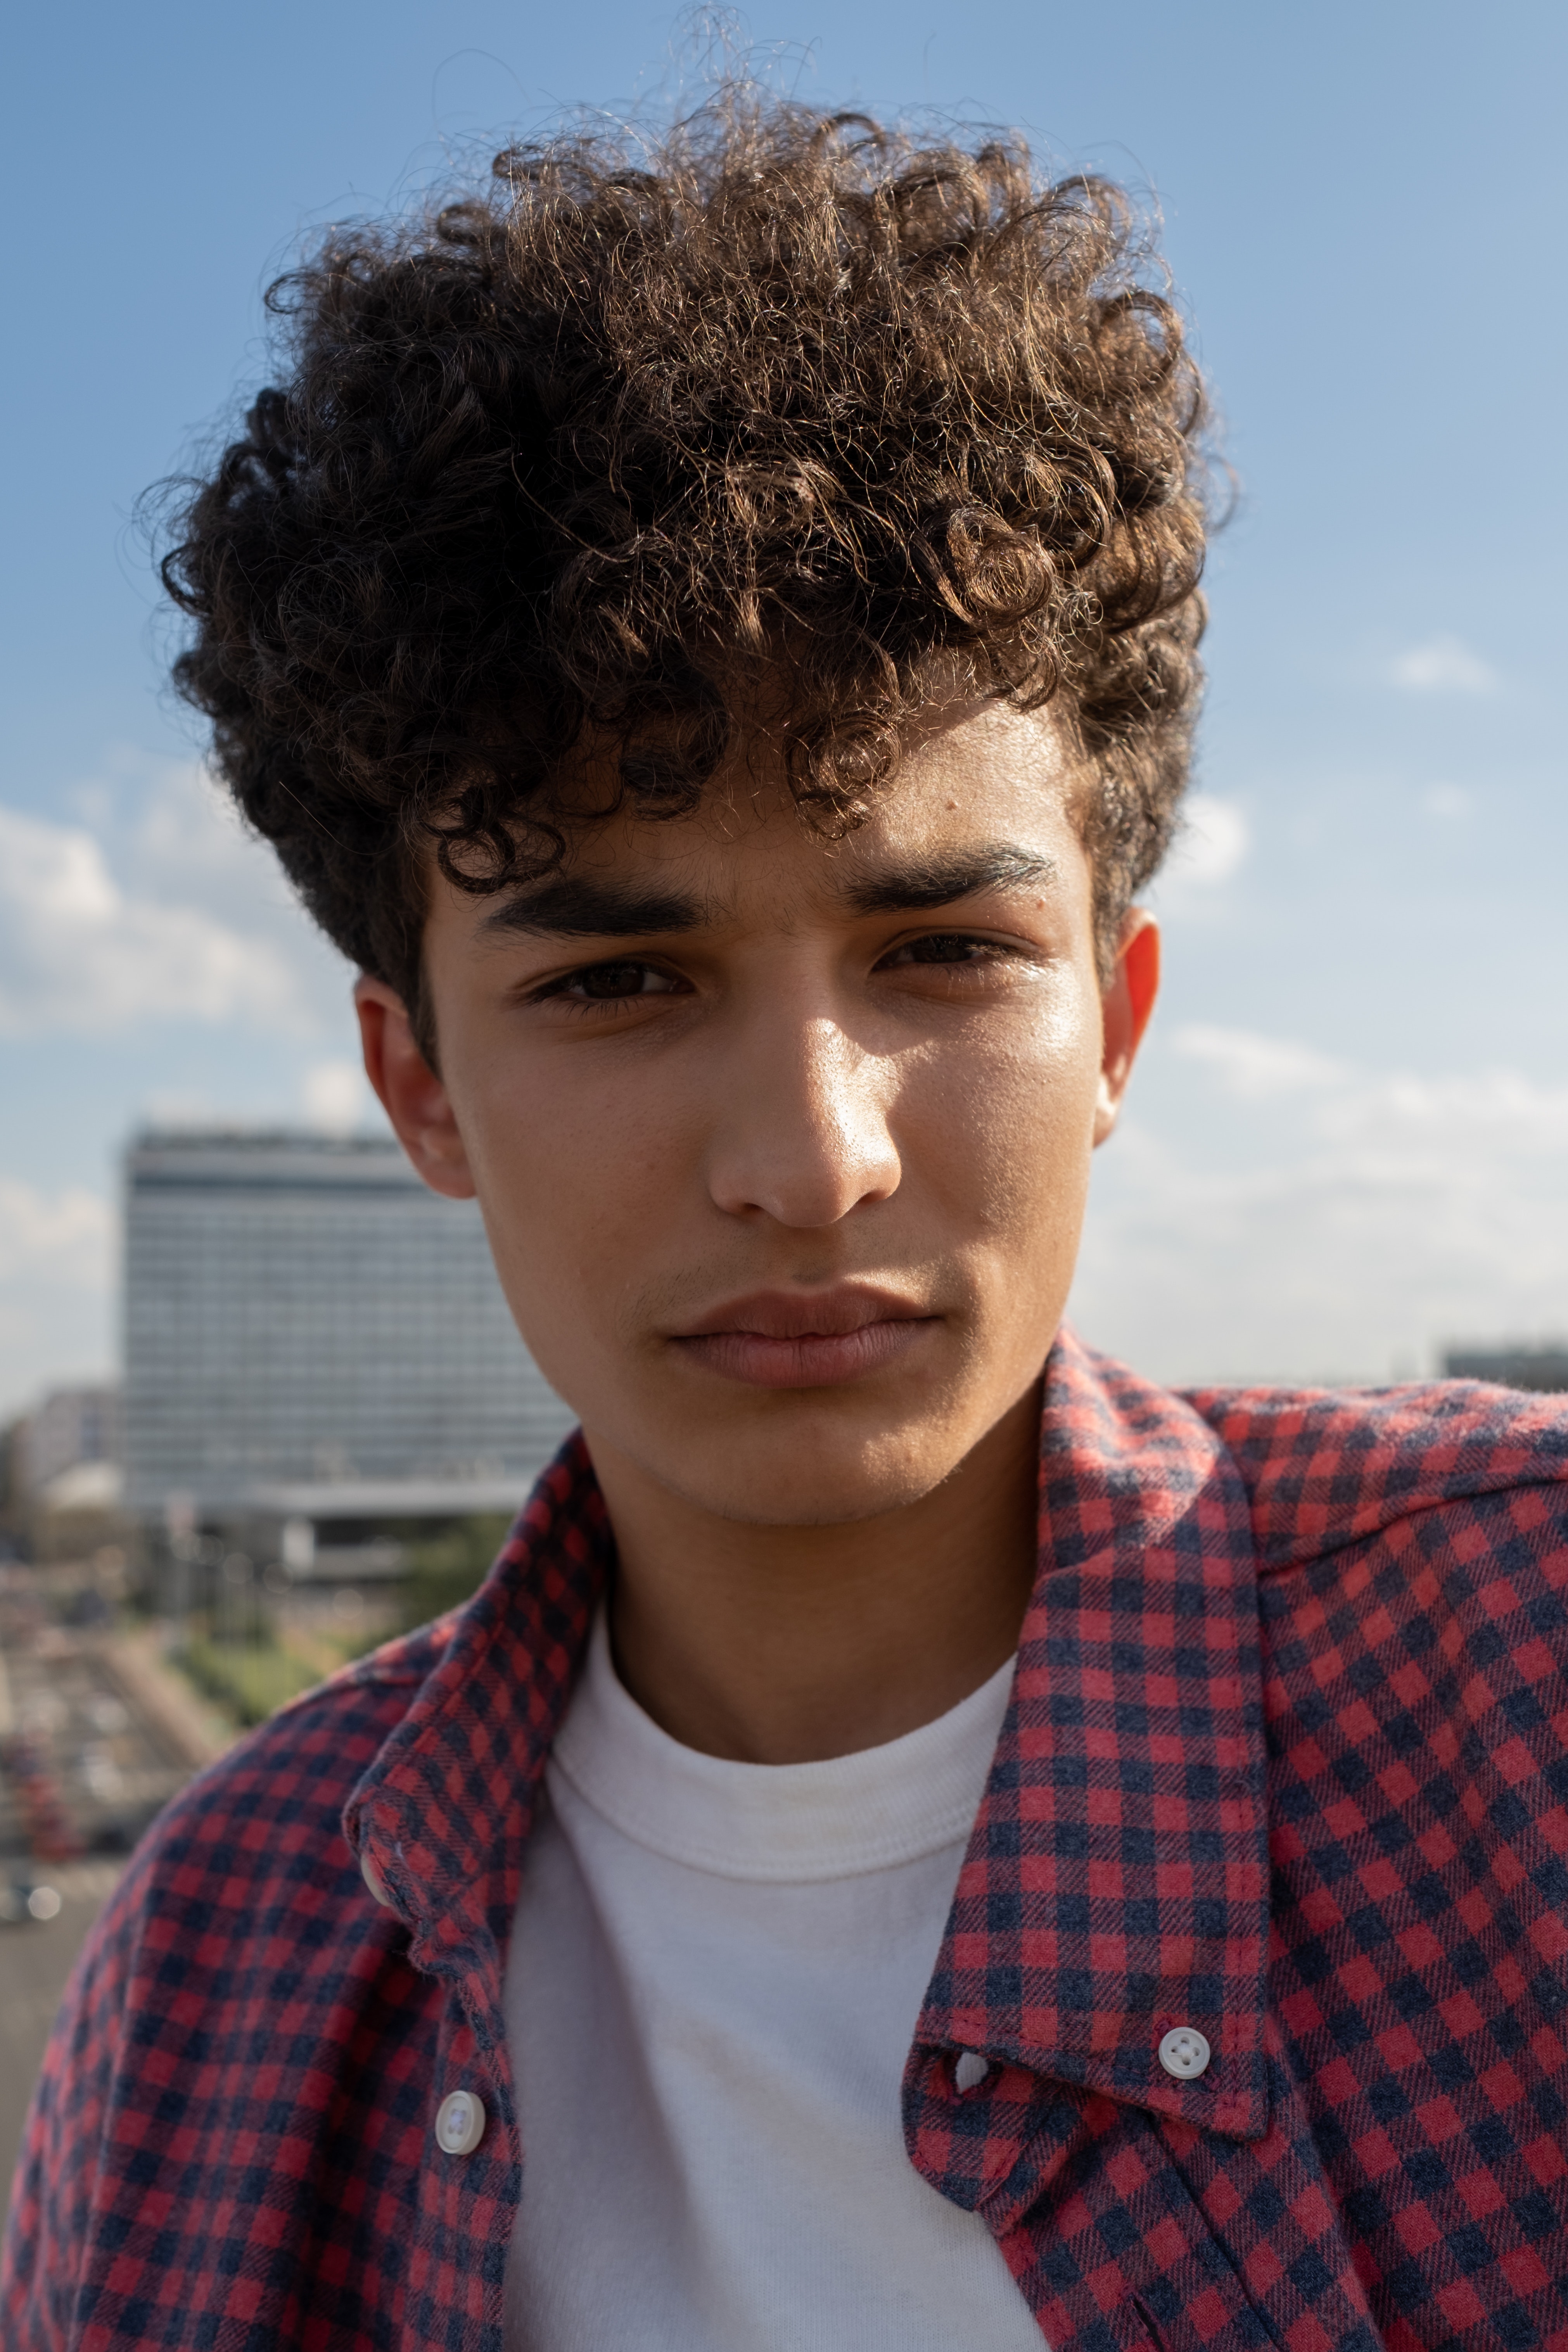 Portrait of teenage boy with curly hair · Free